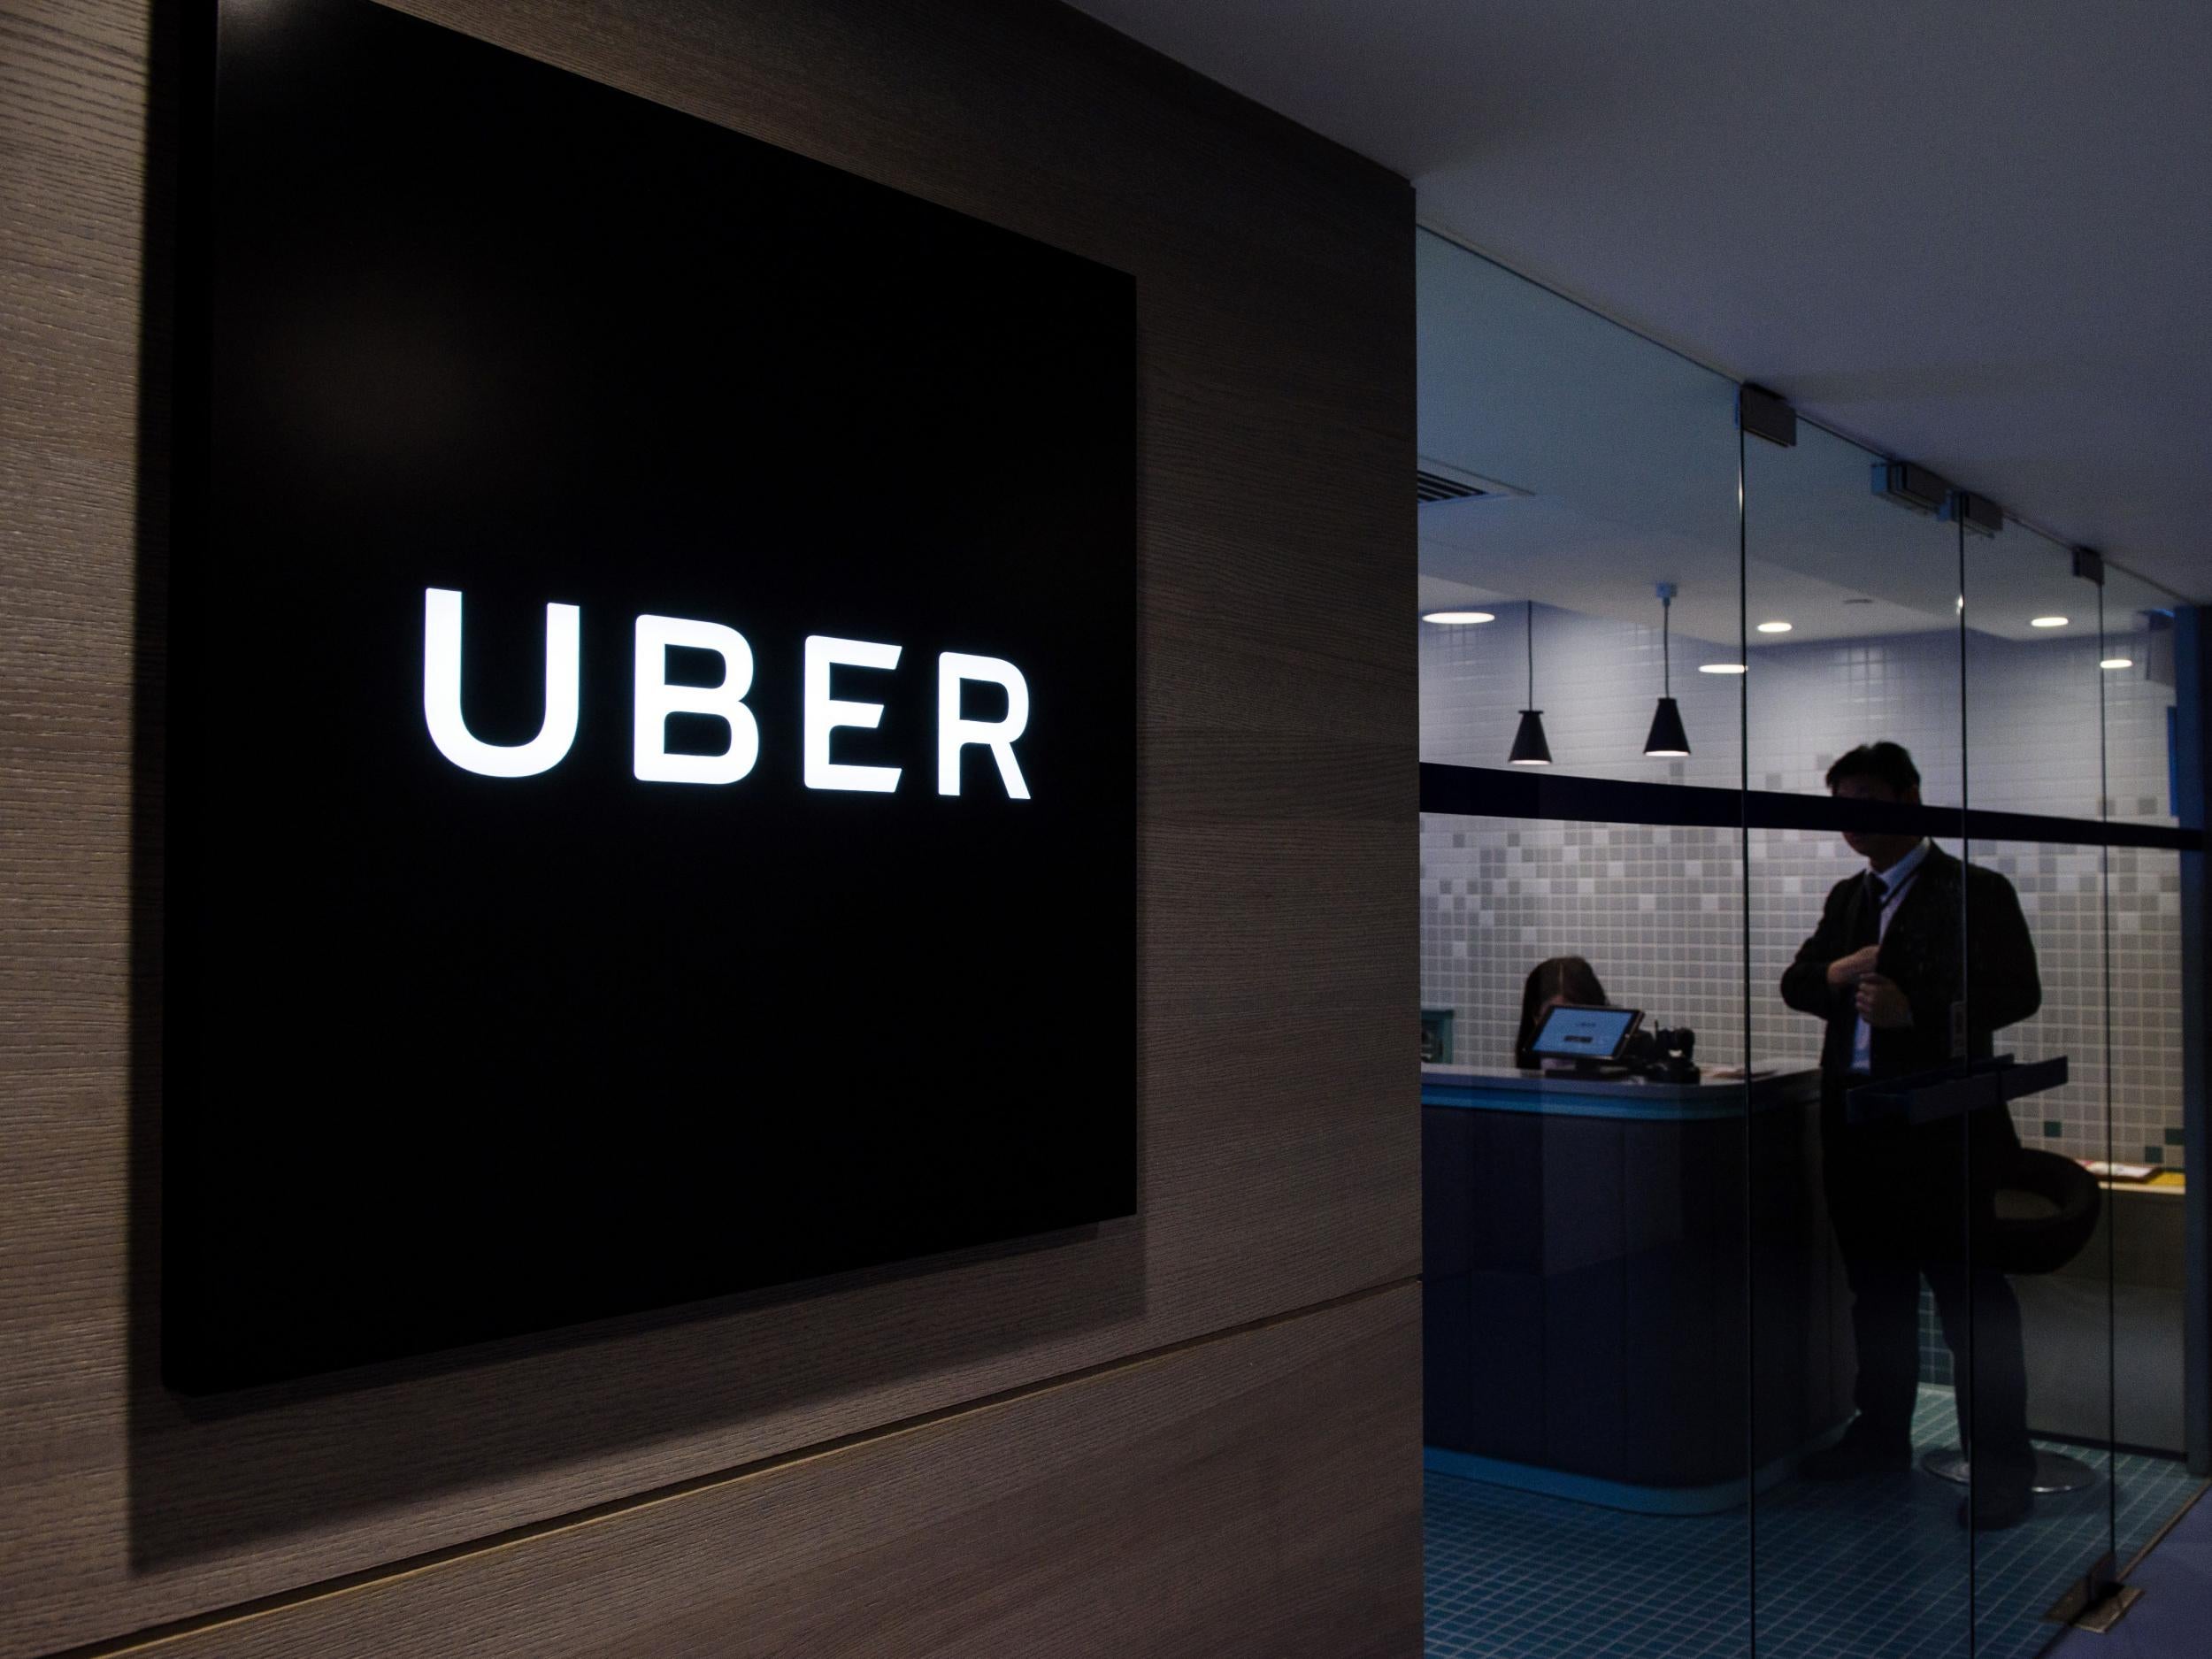 On November 10, Uber lost an appeal against what employment lawyers and trade unions at the time called a landmark ruling, ordering it to no longer treat drivers as self-employed